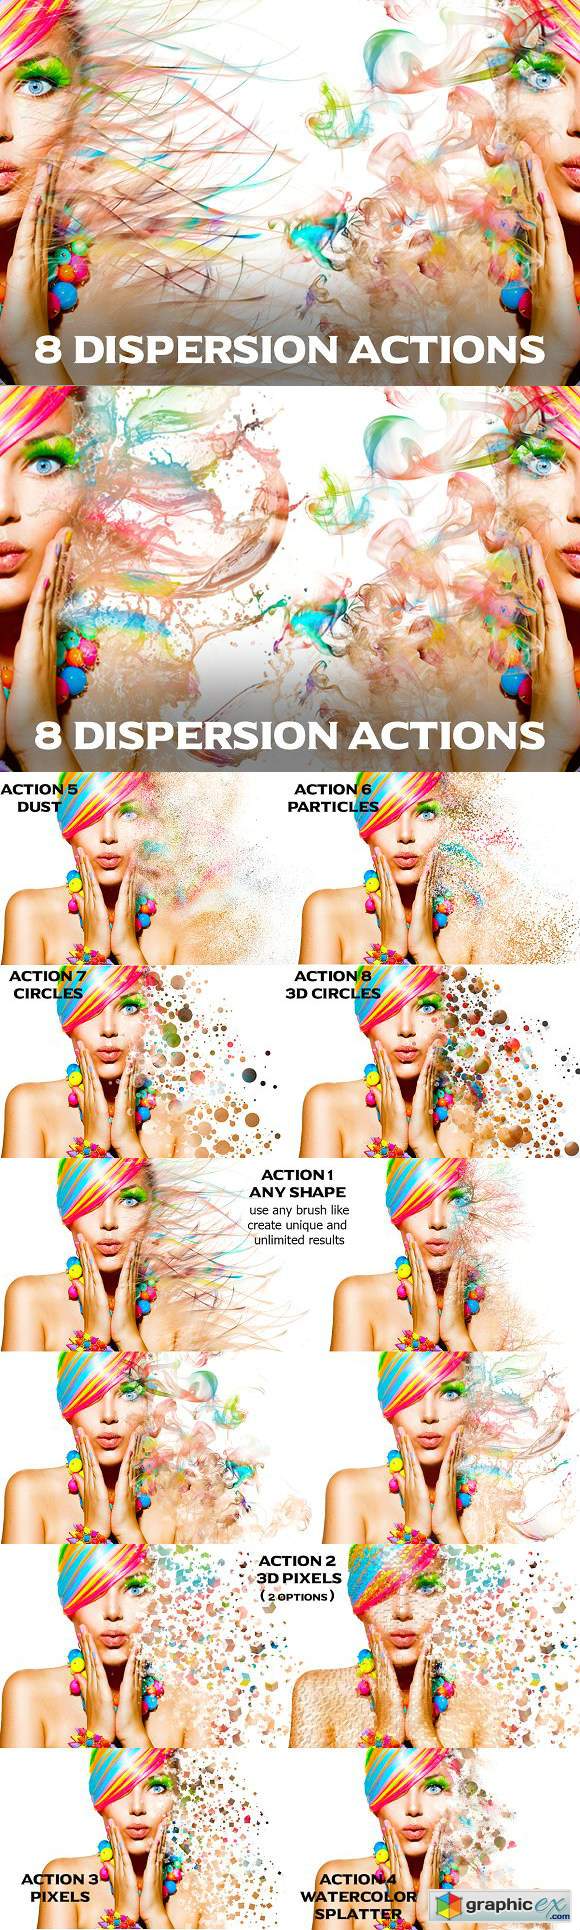 8 Dispersion Actions for Photoshop